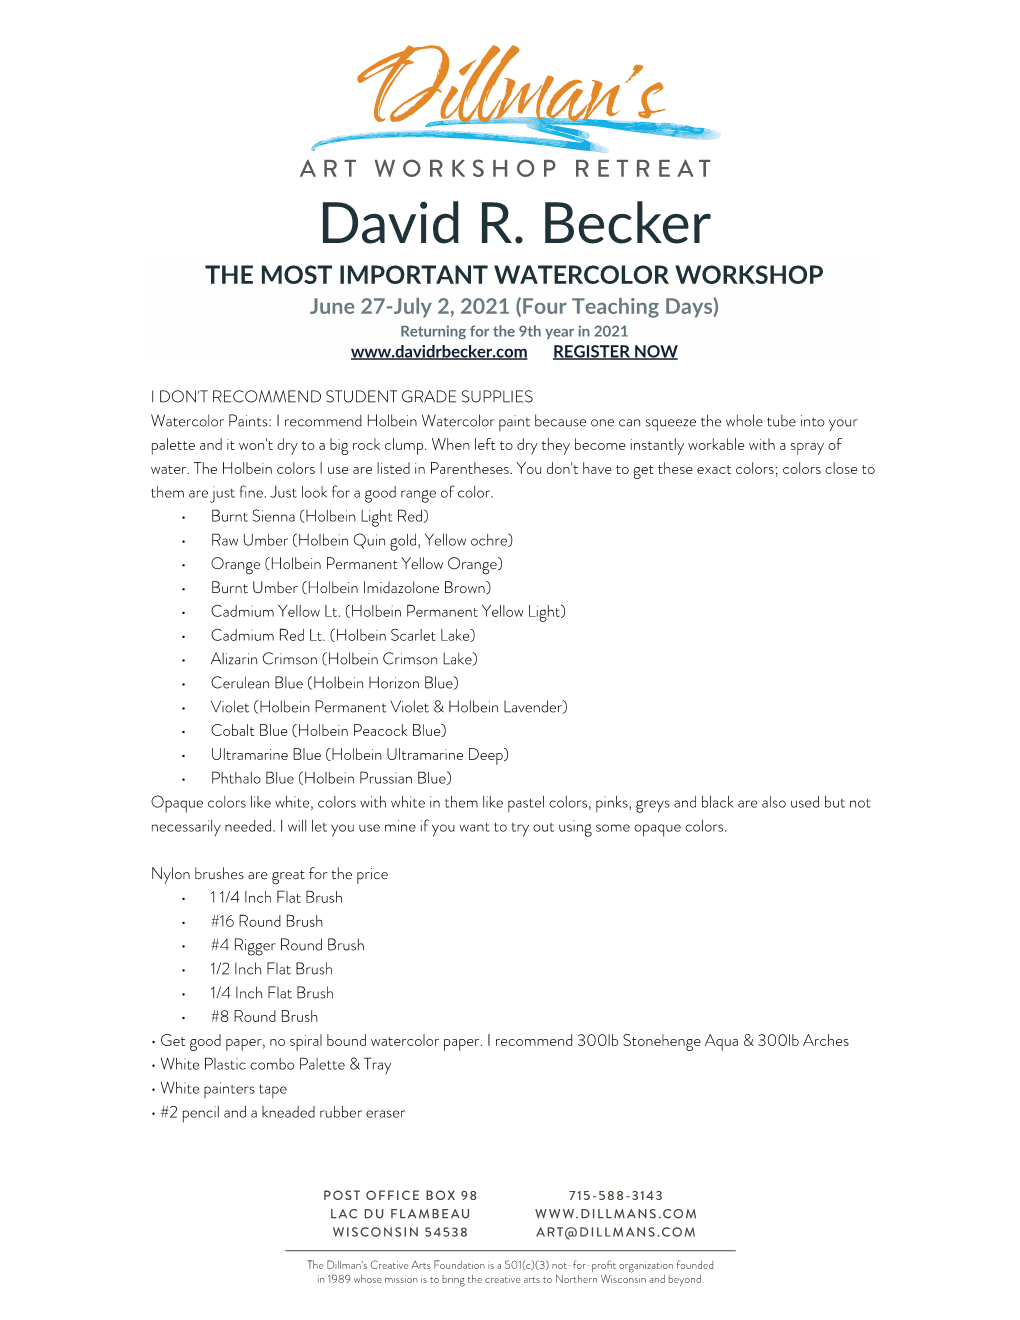 David R. Becker the MOST IMPORTANT WATERCOLOR WORKSHOP June 27-July 2, 2021 (Four Teaching Days) Returning for the 9Th Year in 2021 REGISTER NOW